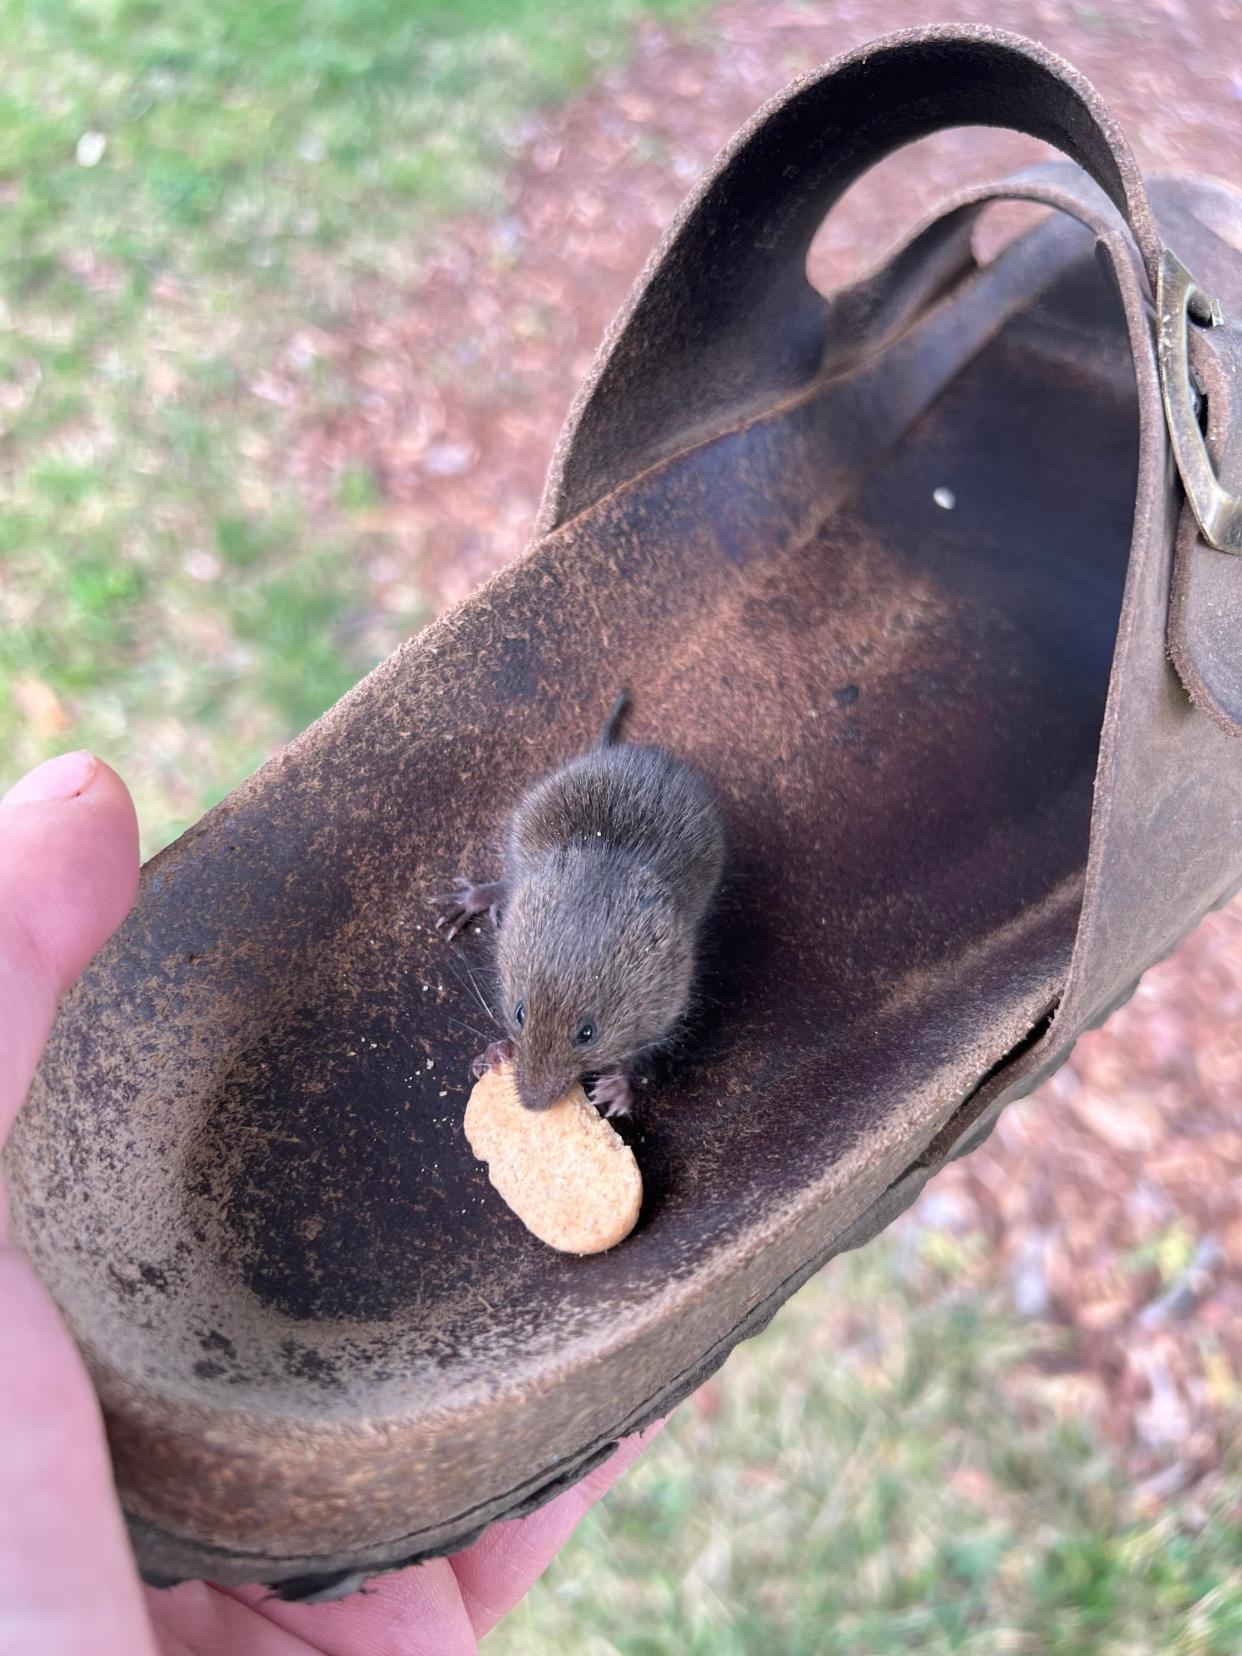 This shrew was found on Imagination Station playground in Oconomowoc on Friday, Aug. 18, by a man who happened to be there. It's unknown if this is the small rodent that prompted a concern resulting in the temporary closing of the playground on Aug. 21.